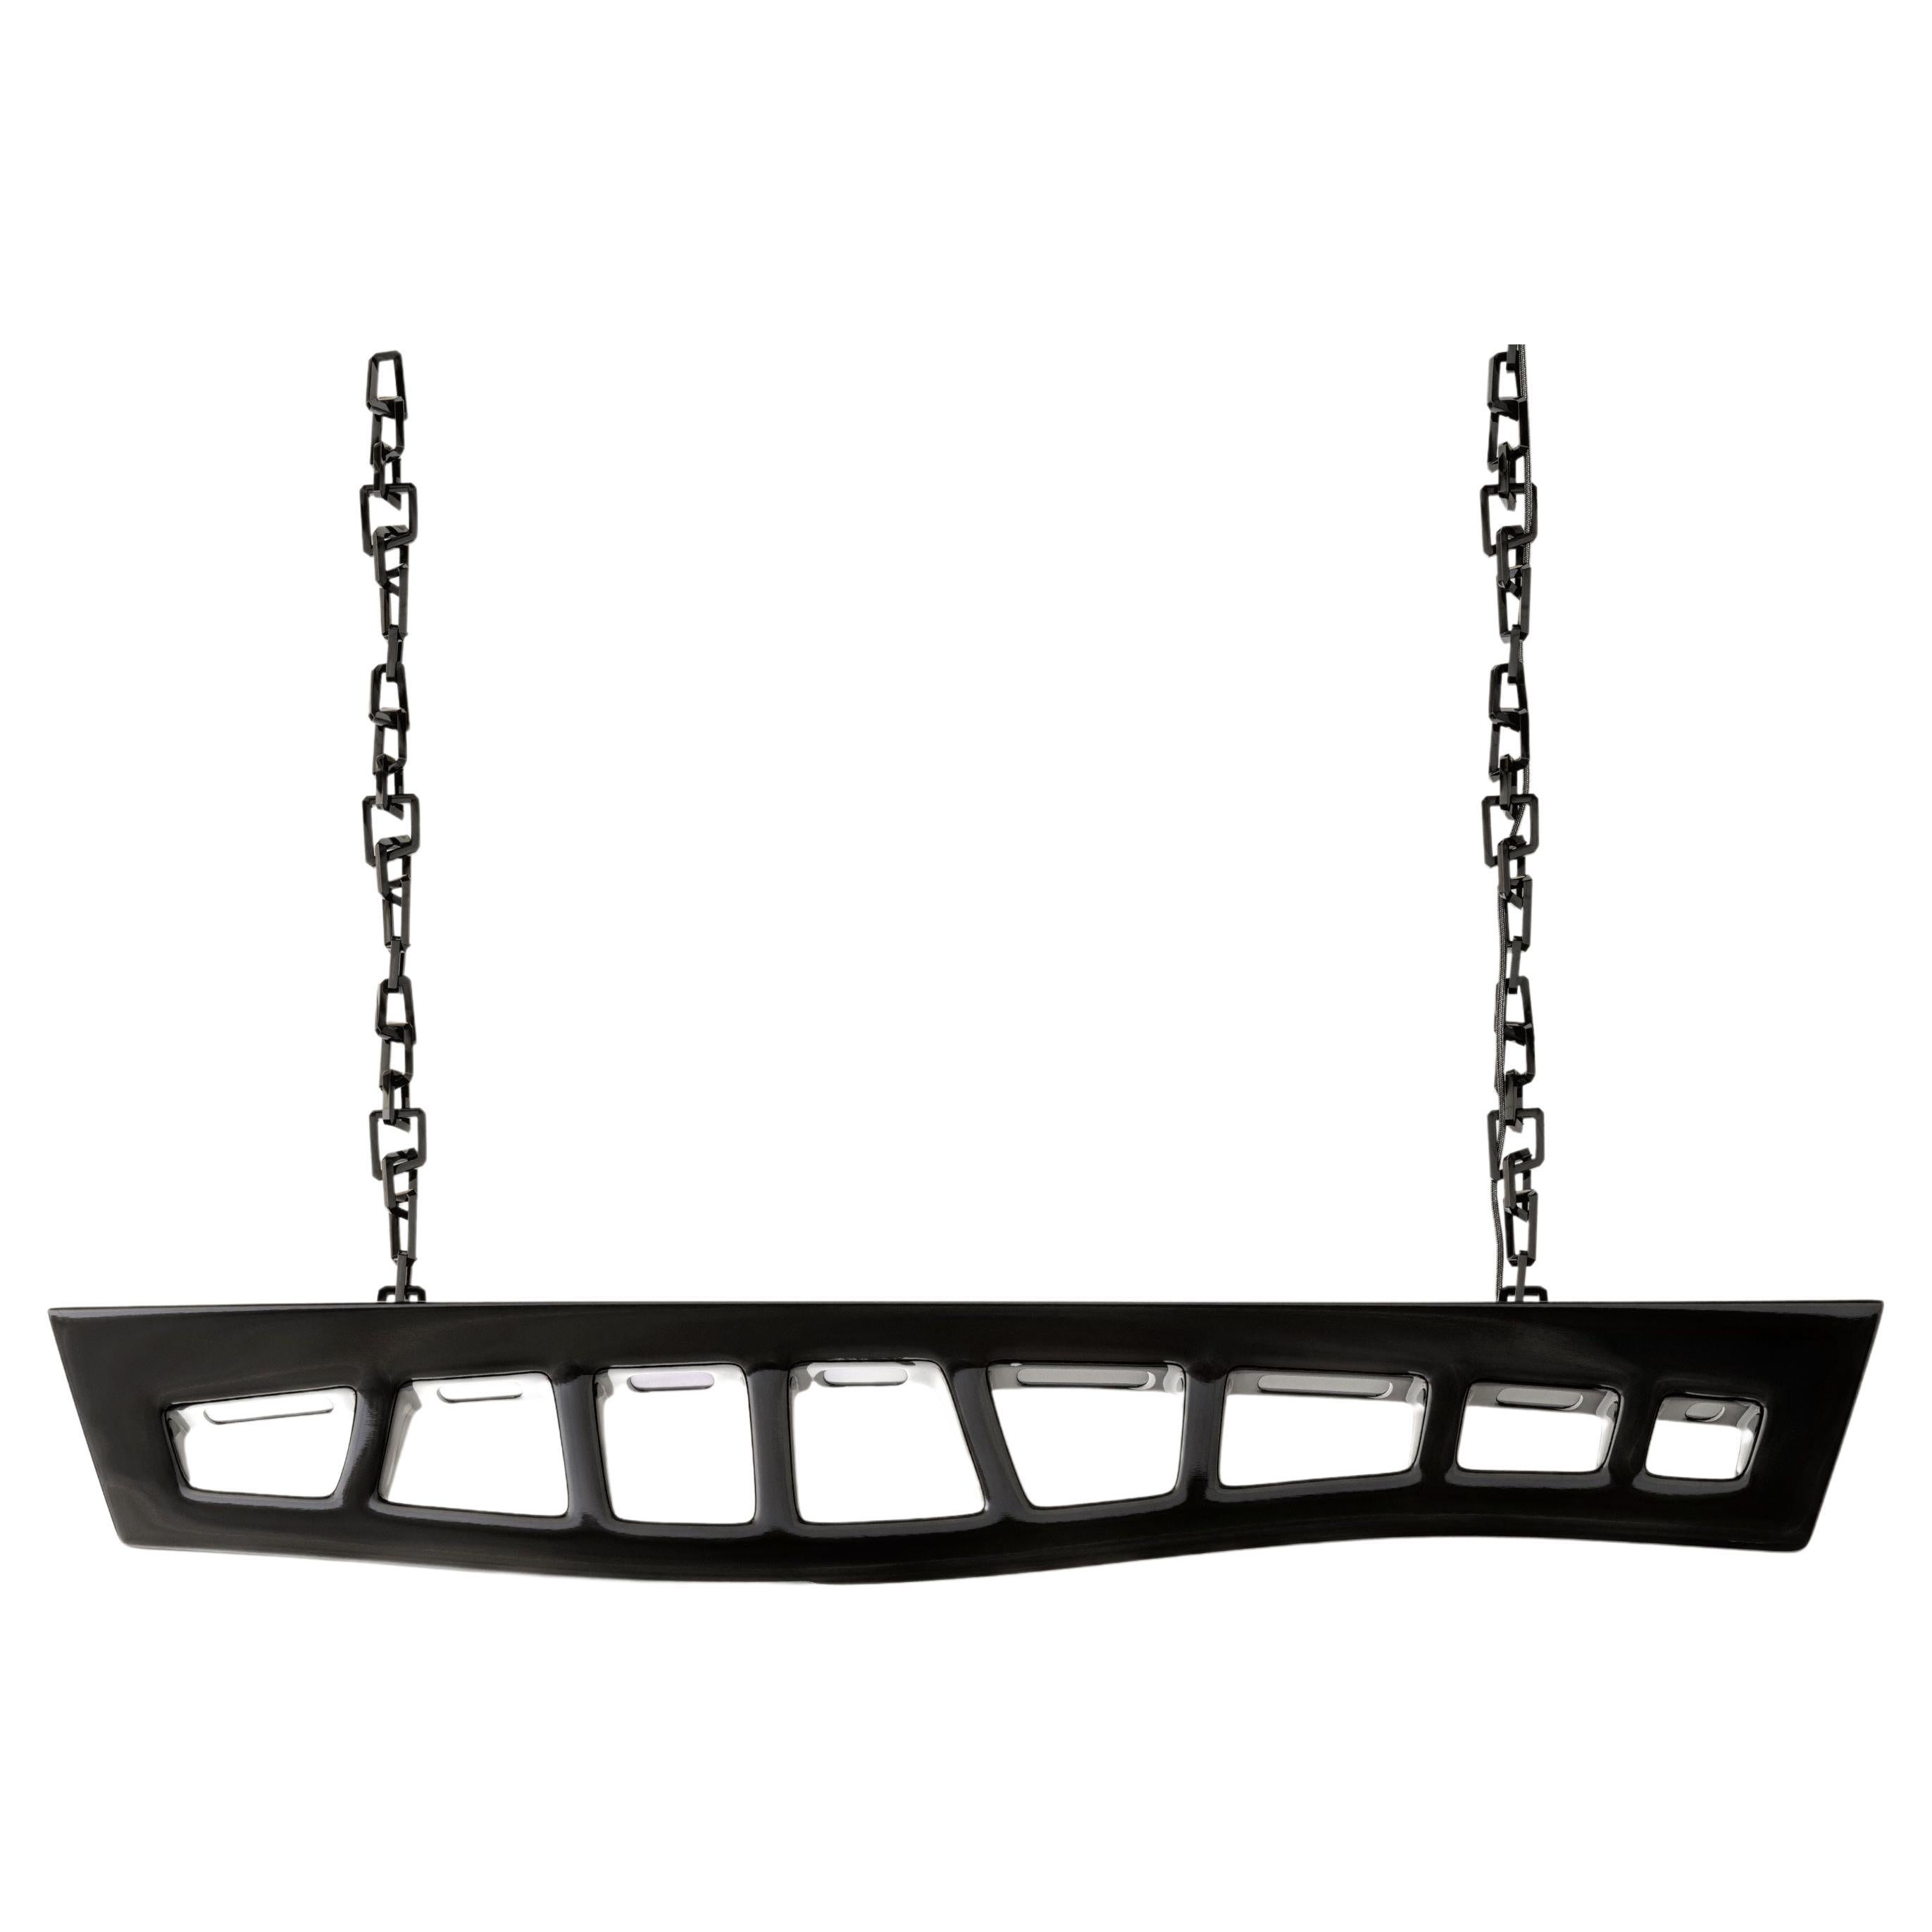 Barracuda Chandelier in Piano Black Finish by Palena Furniture  For Sale